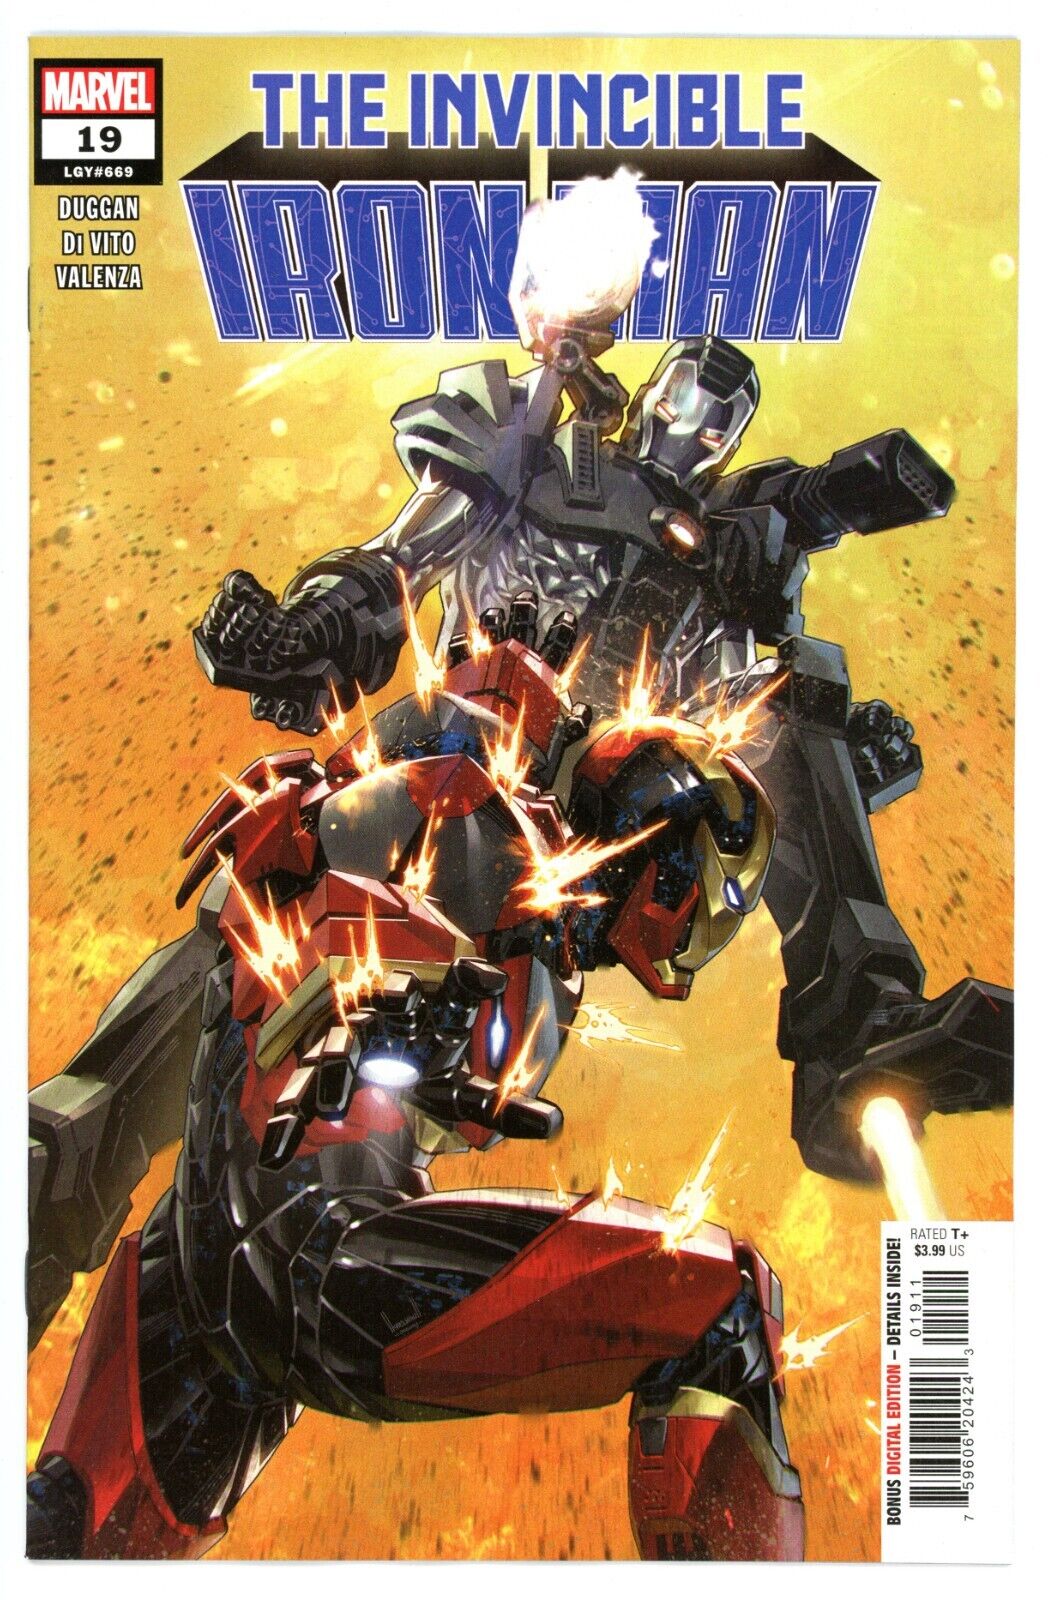 The Invincible Iron Man #19 .  First Print  .   NM  NEW  💥NO STOCK PHOTOS💥